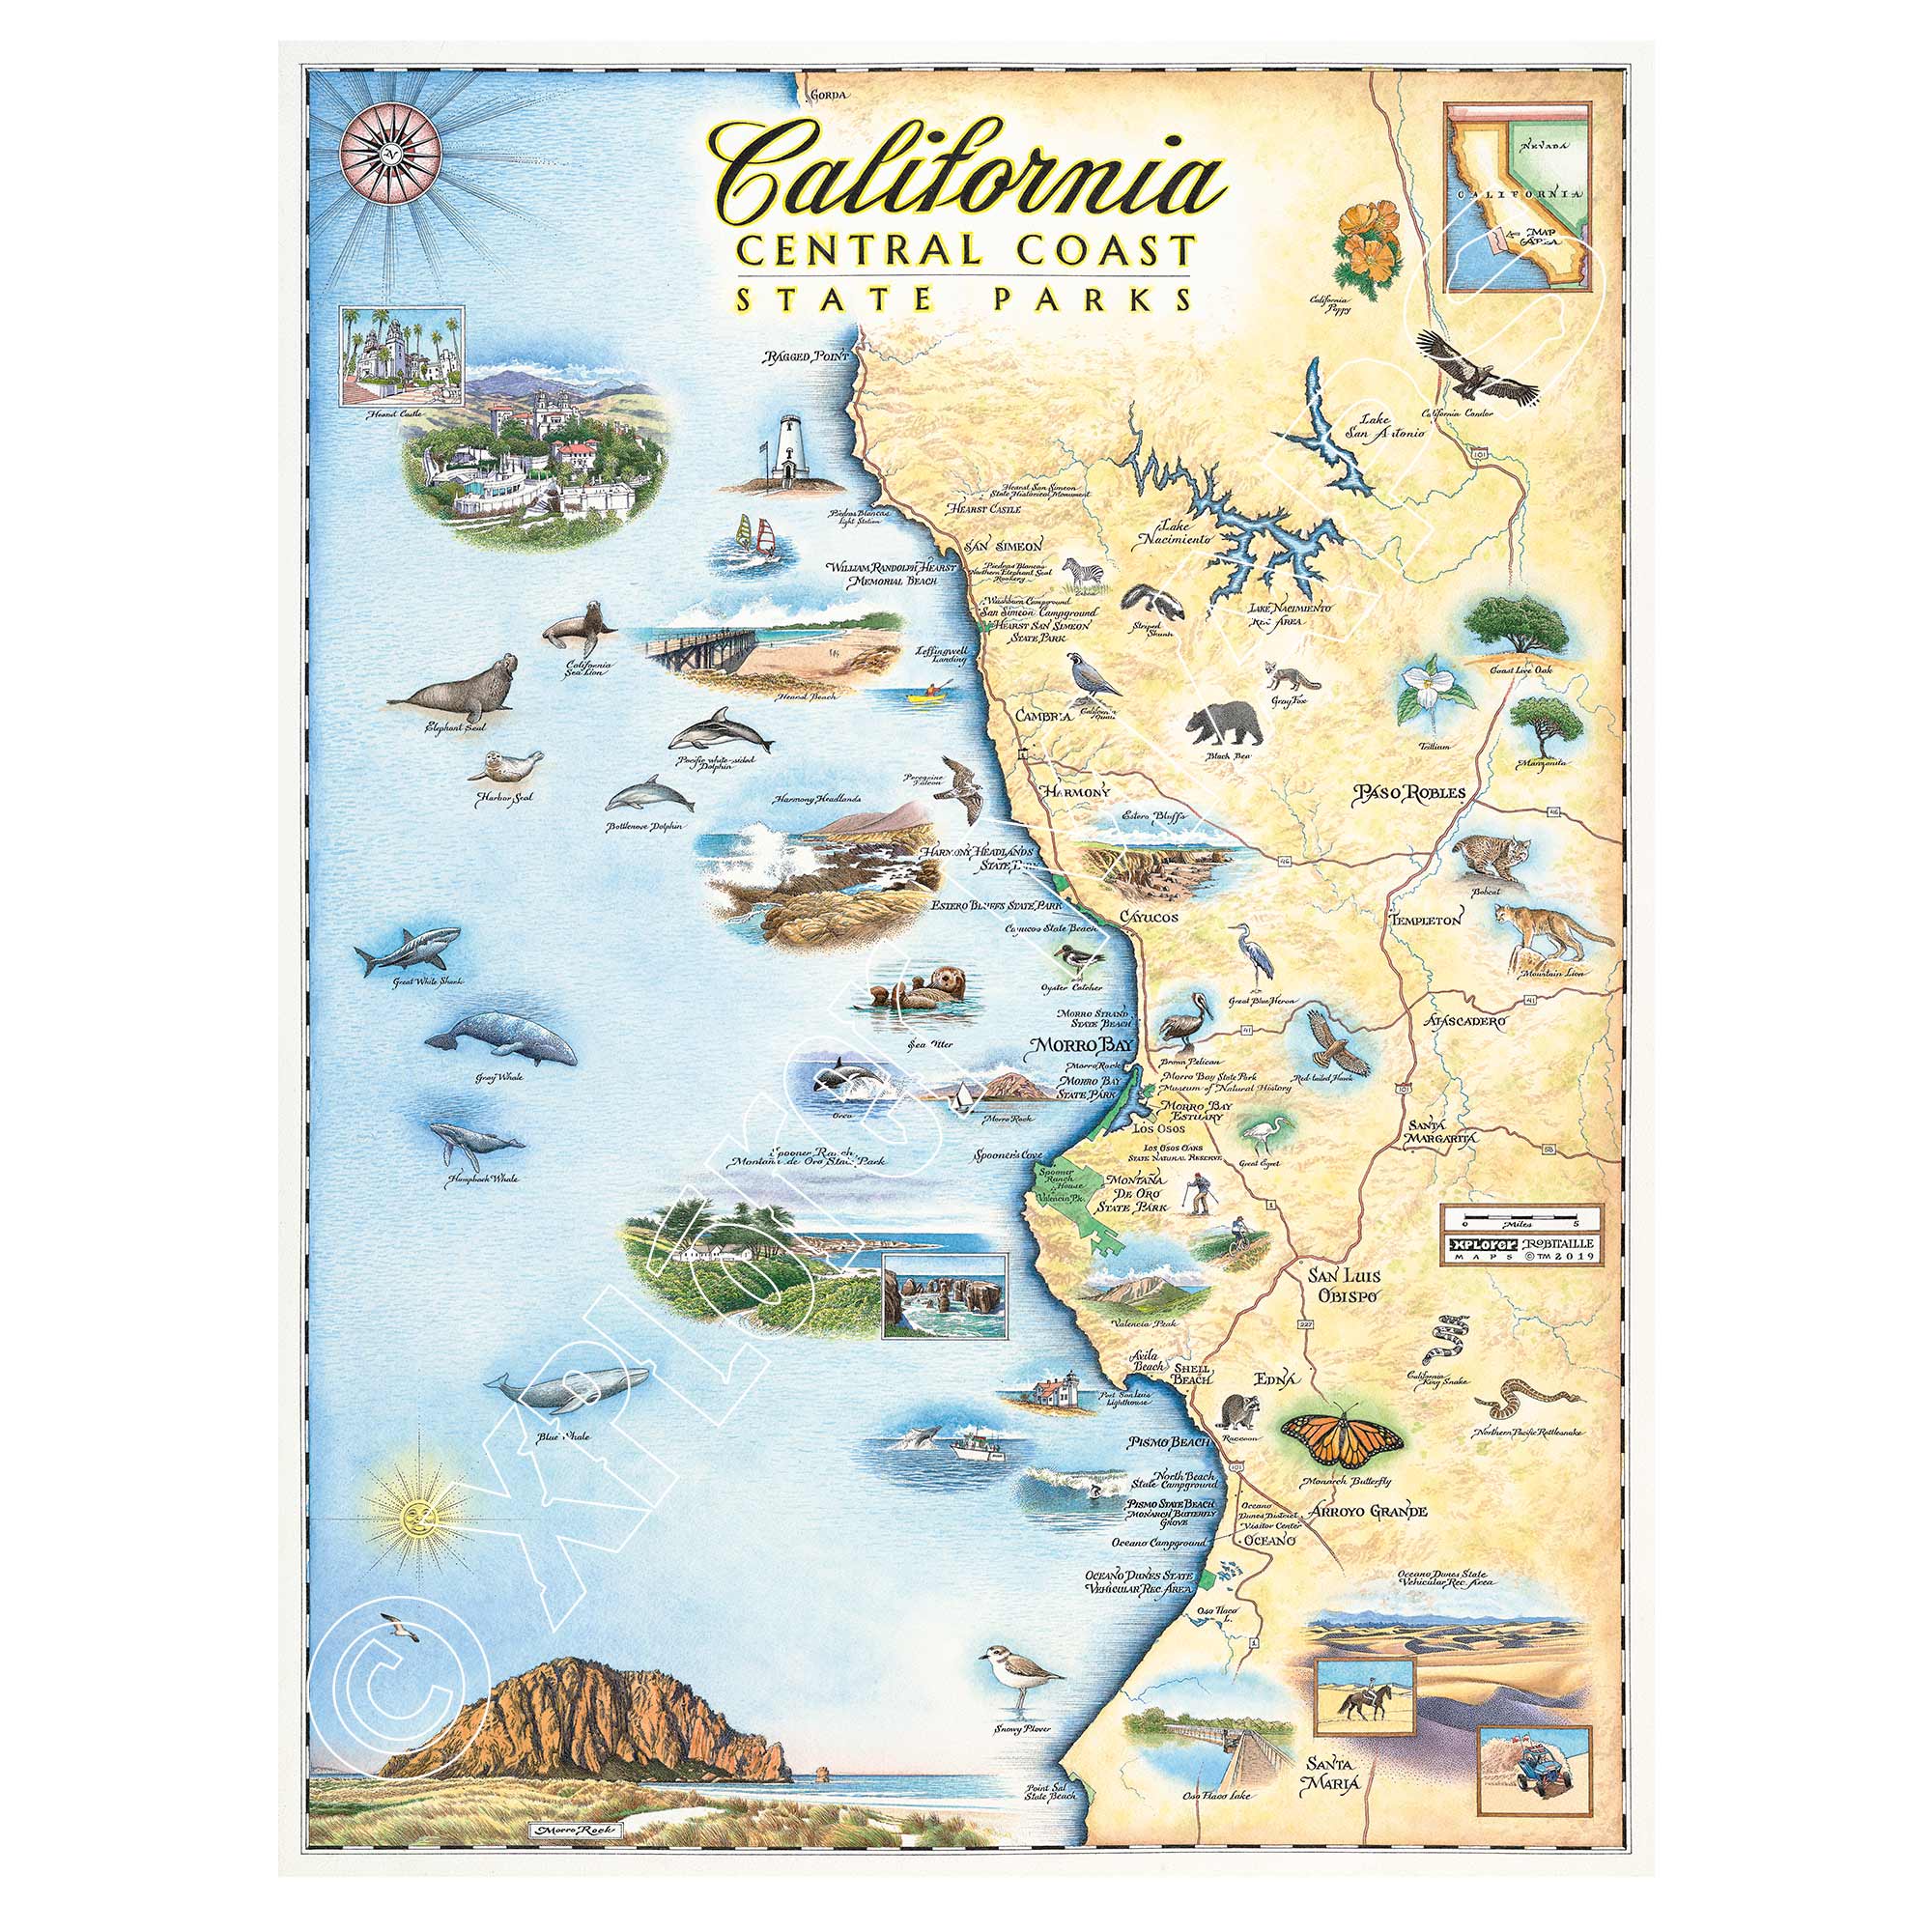 This is a hand-drawn map of California's Central Coast in earth tones. The map showcases various elements such as black bears, the ocean, butterflies, seals, sharks, Santa Maria, Arroyo Grande, San Luis Obispo, Morro Bay, and Paso Robles. It measures 18x24.